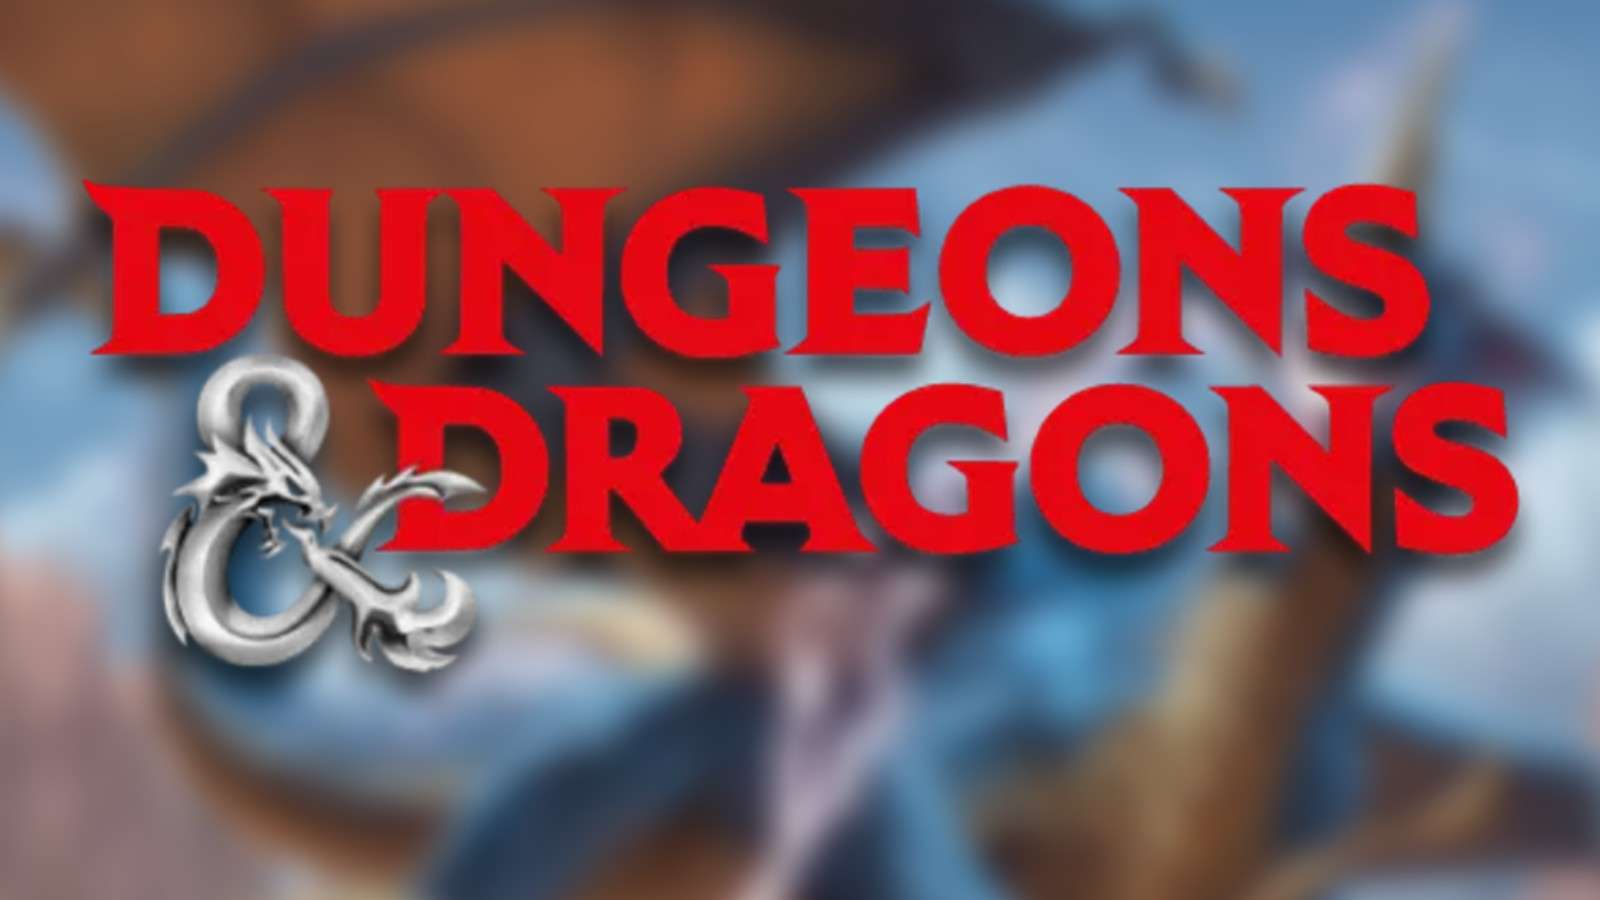 Dungeons and Dragons logo over official artwork.